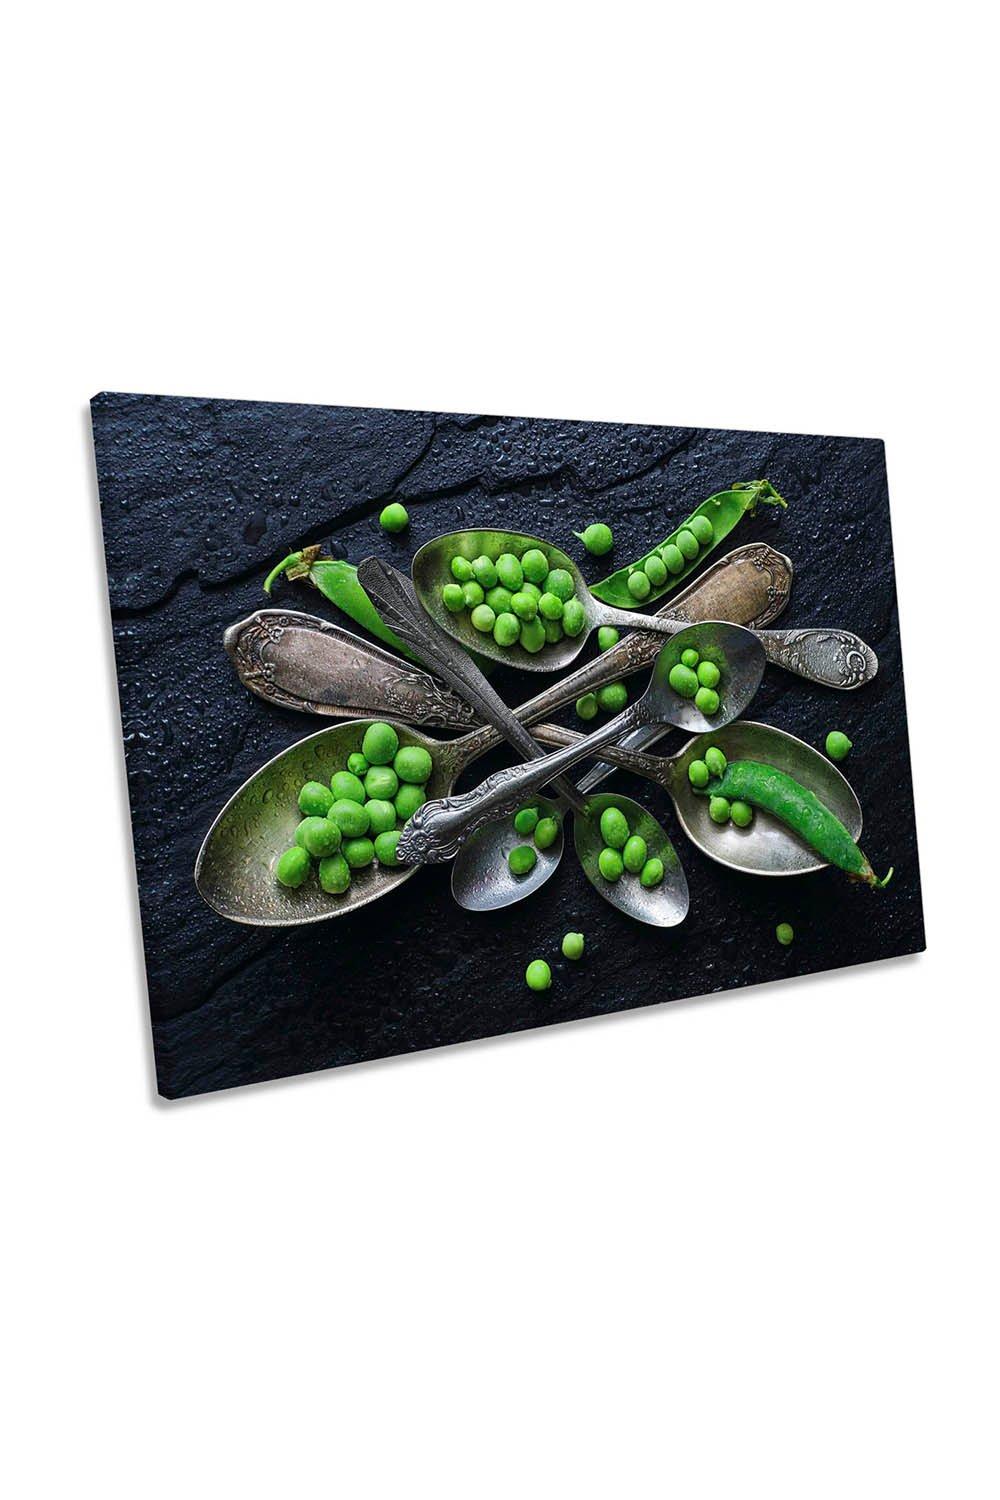 Spoons Green Peas Modern Kitchen Canvas Wall Art Picture Print